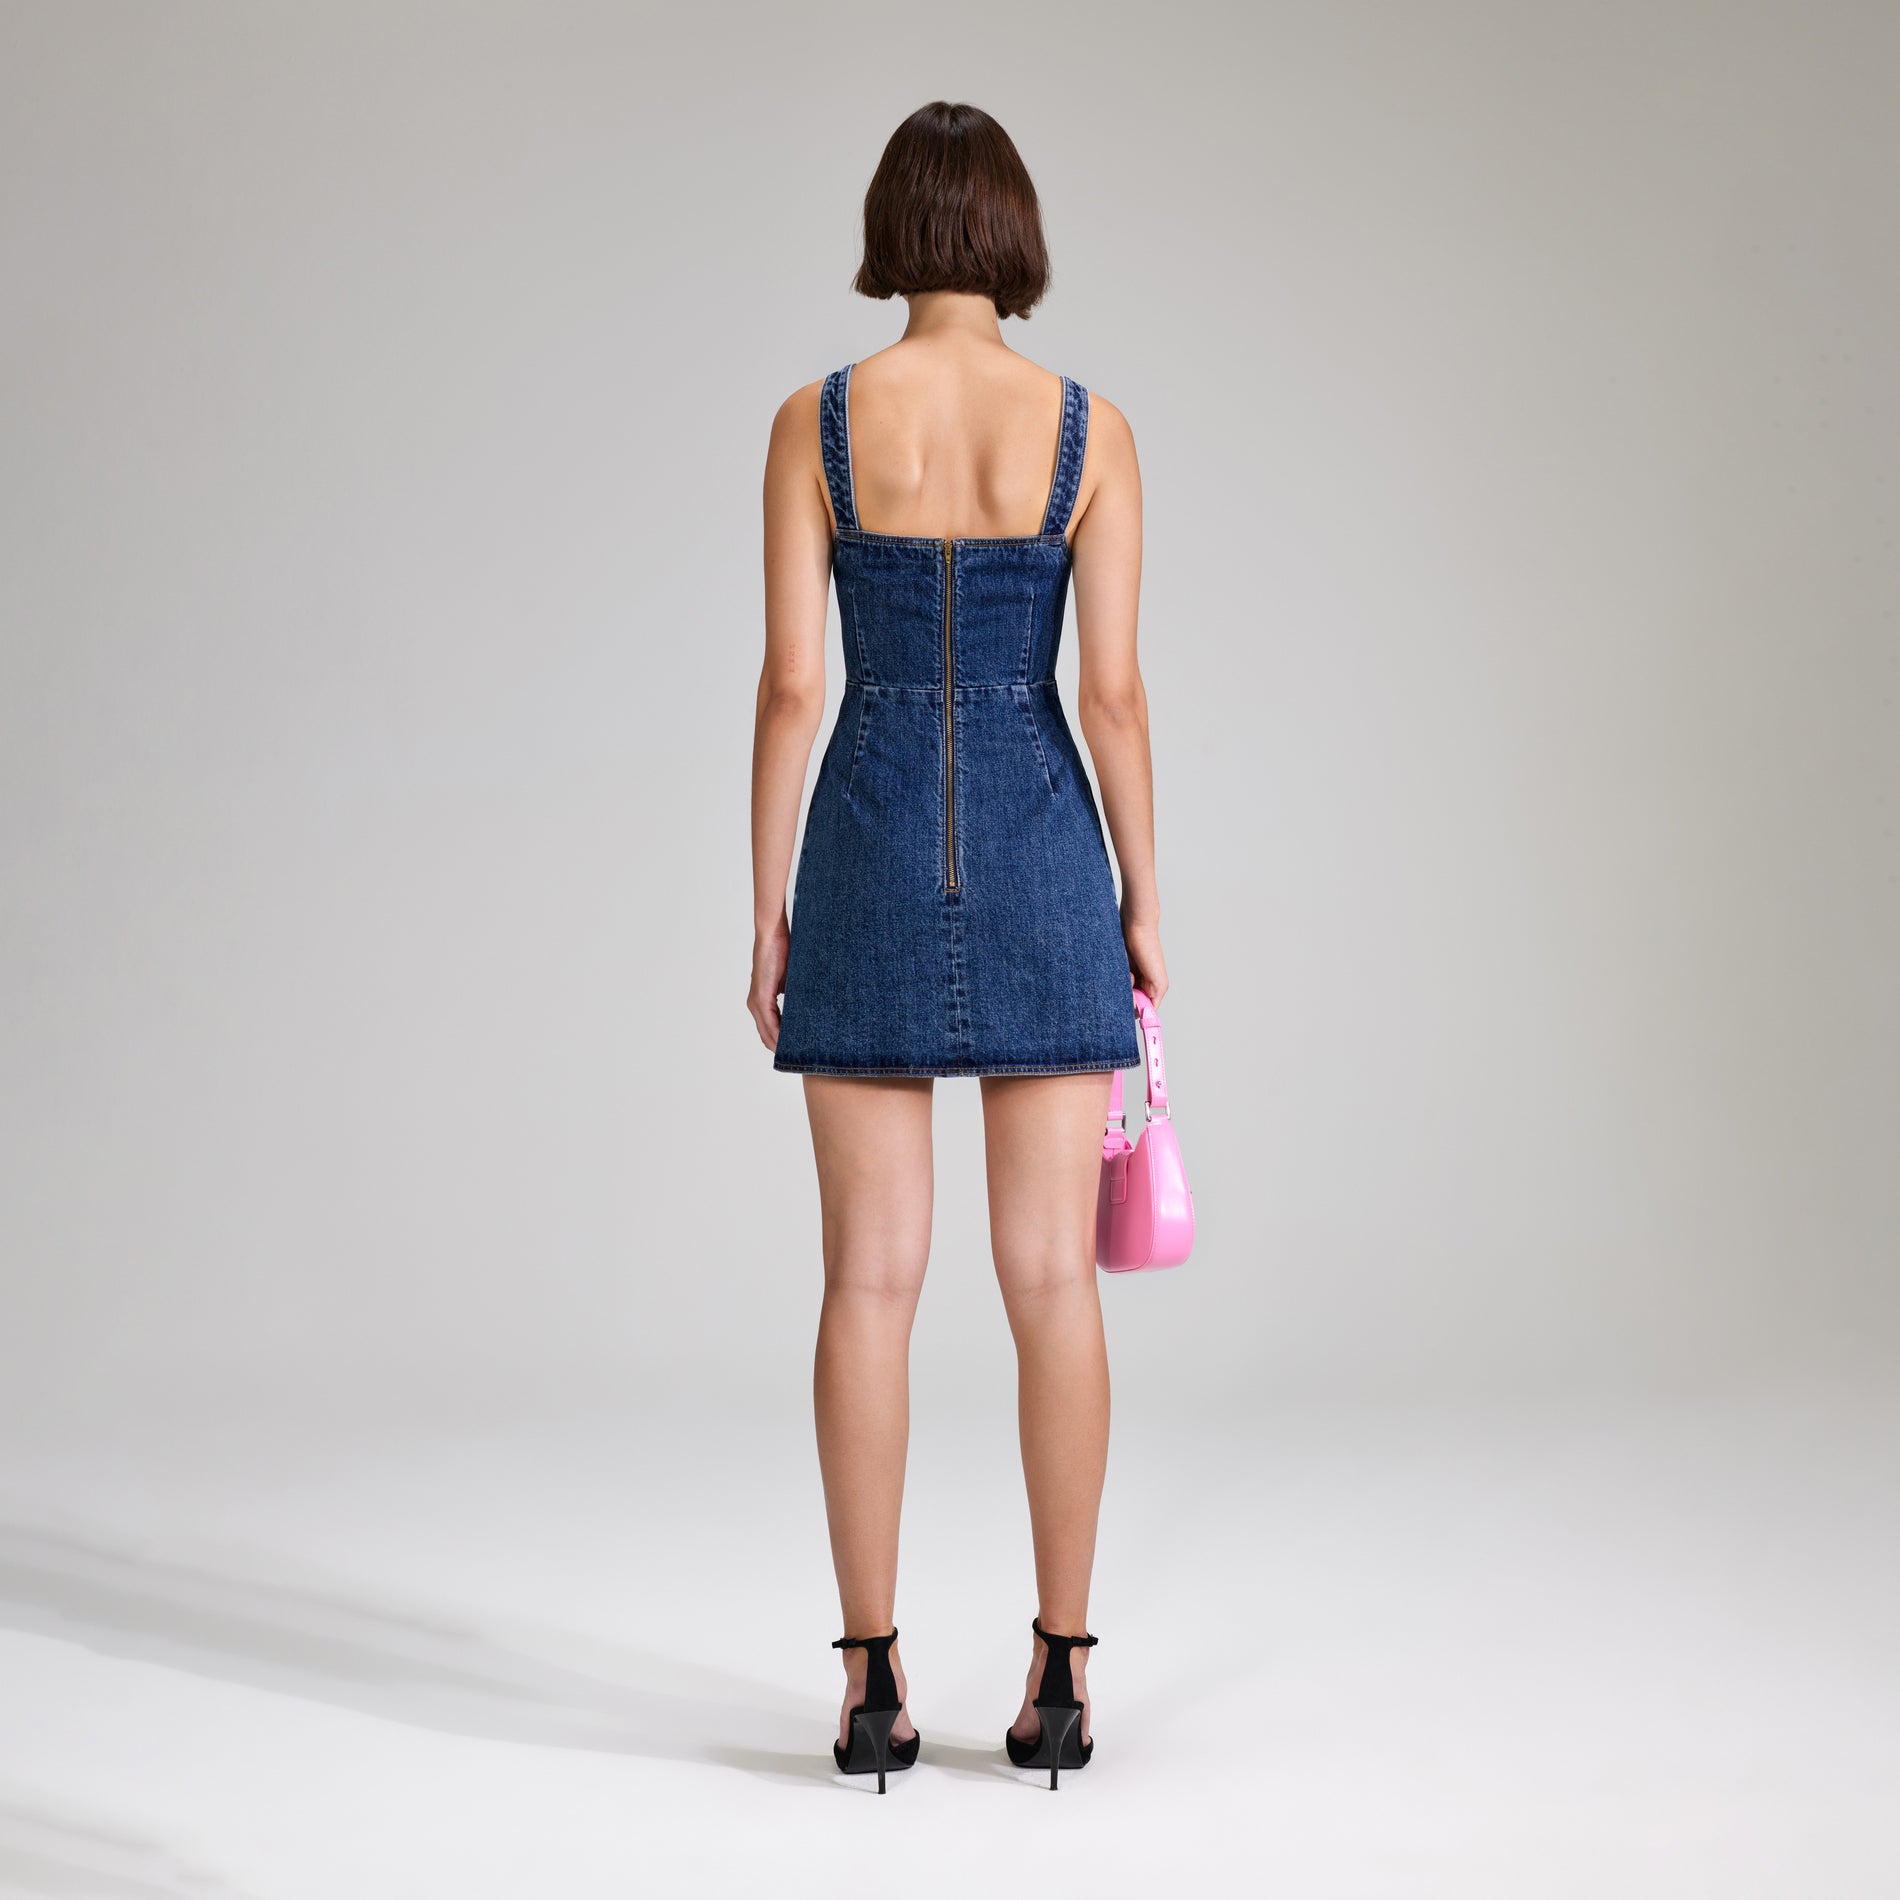 A woman wearing the Denim Mini Dress With Bows